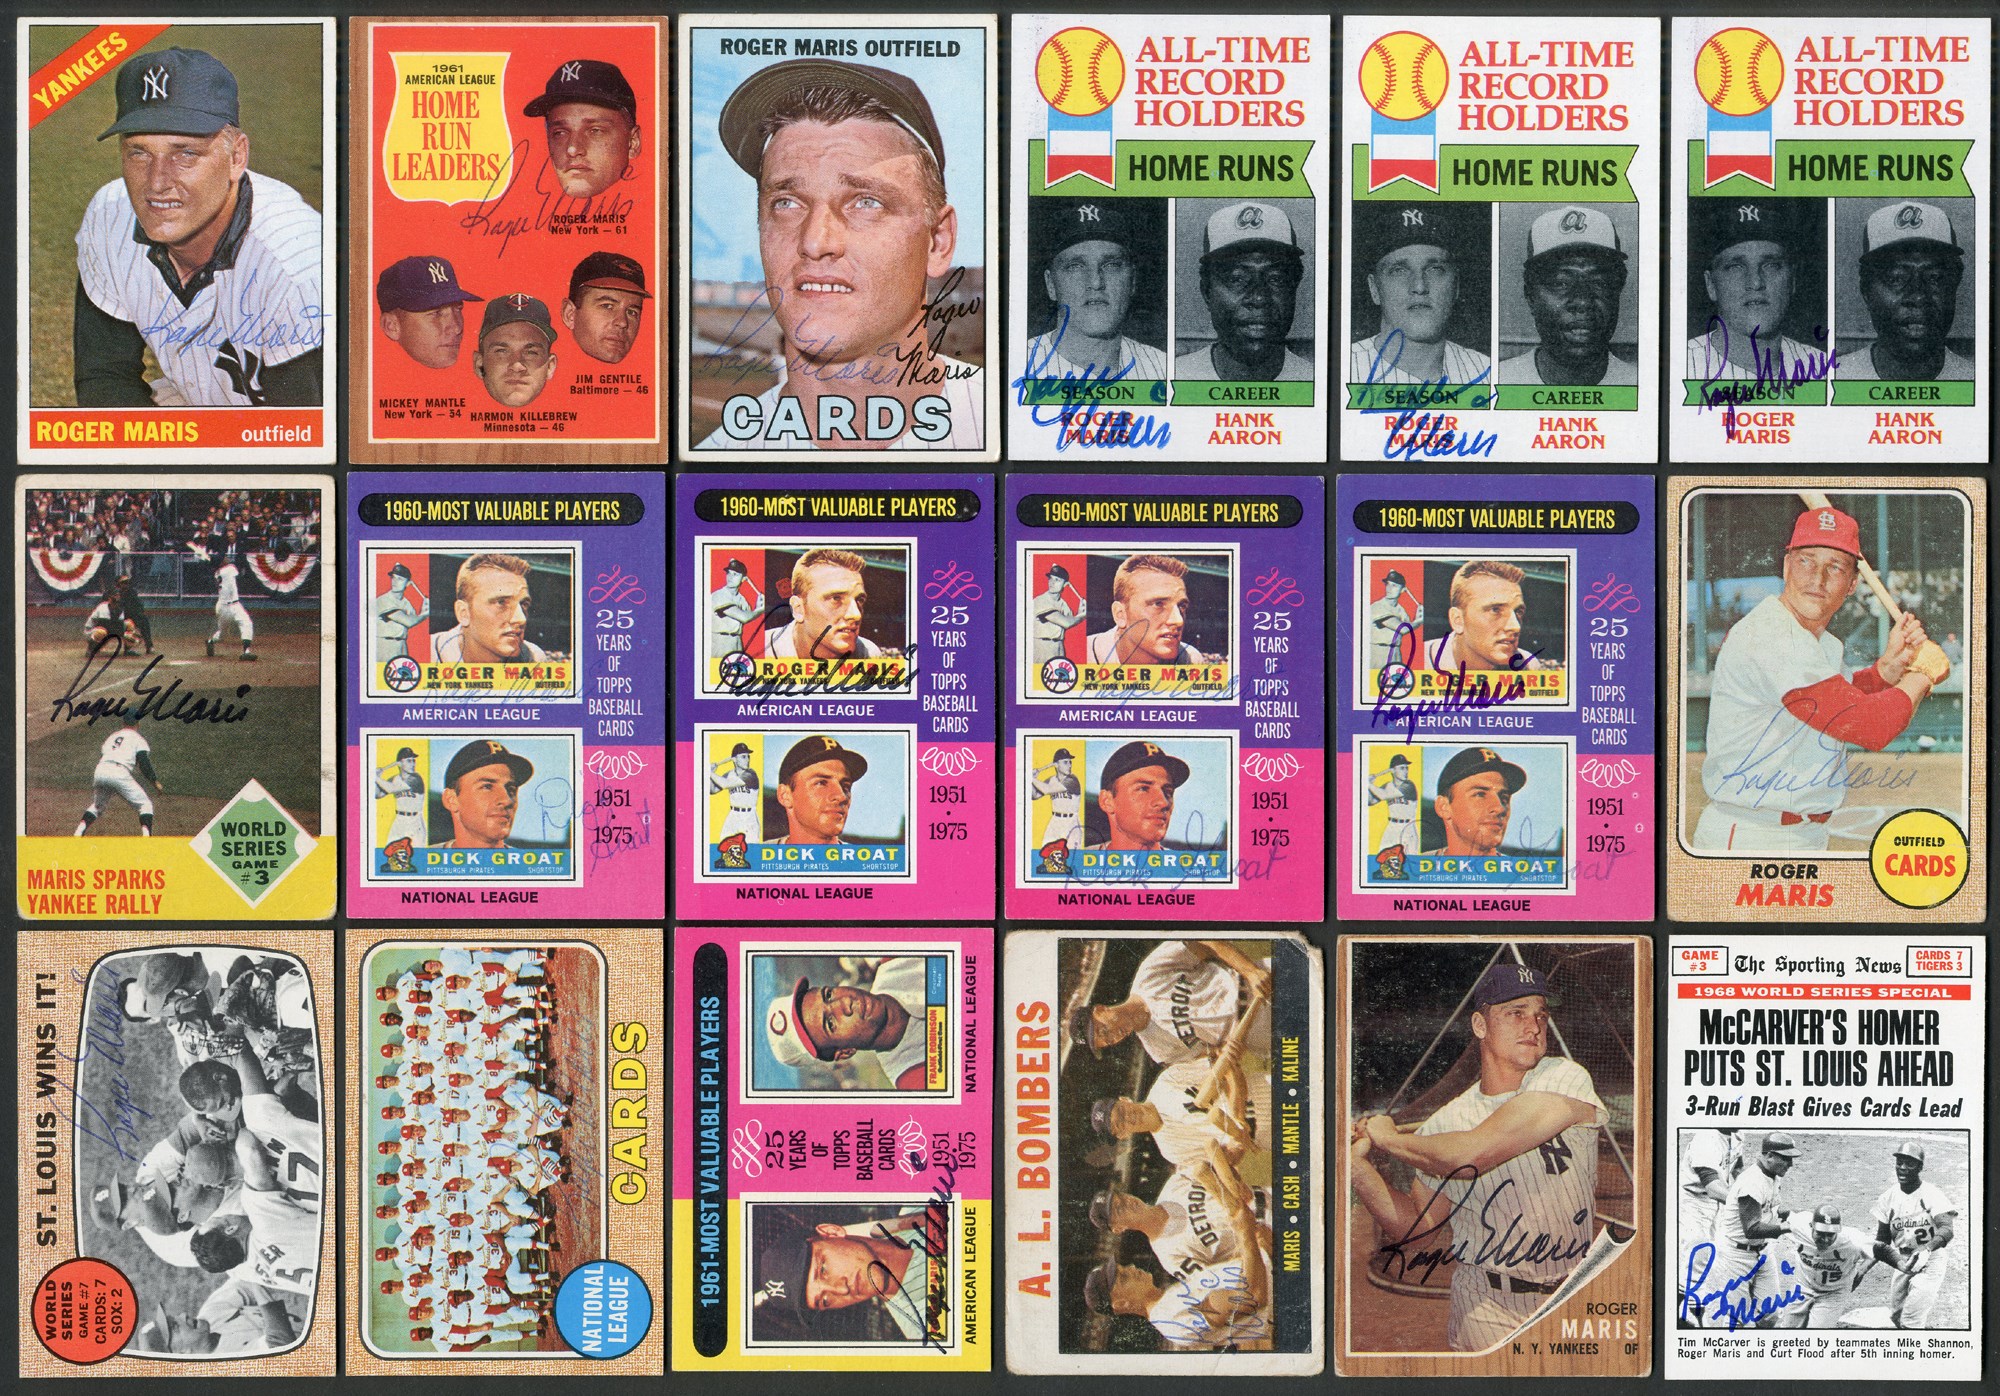 Baseball and Trading Cards - Fantastic Topps Roger Maris Signed Card Collection (18)